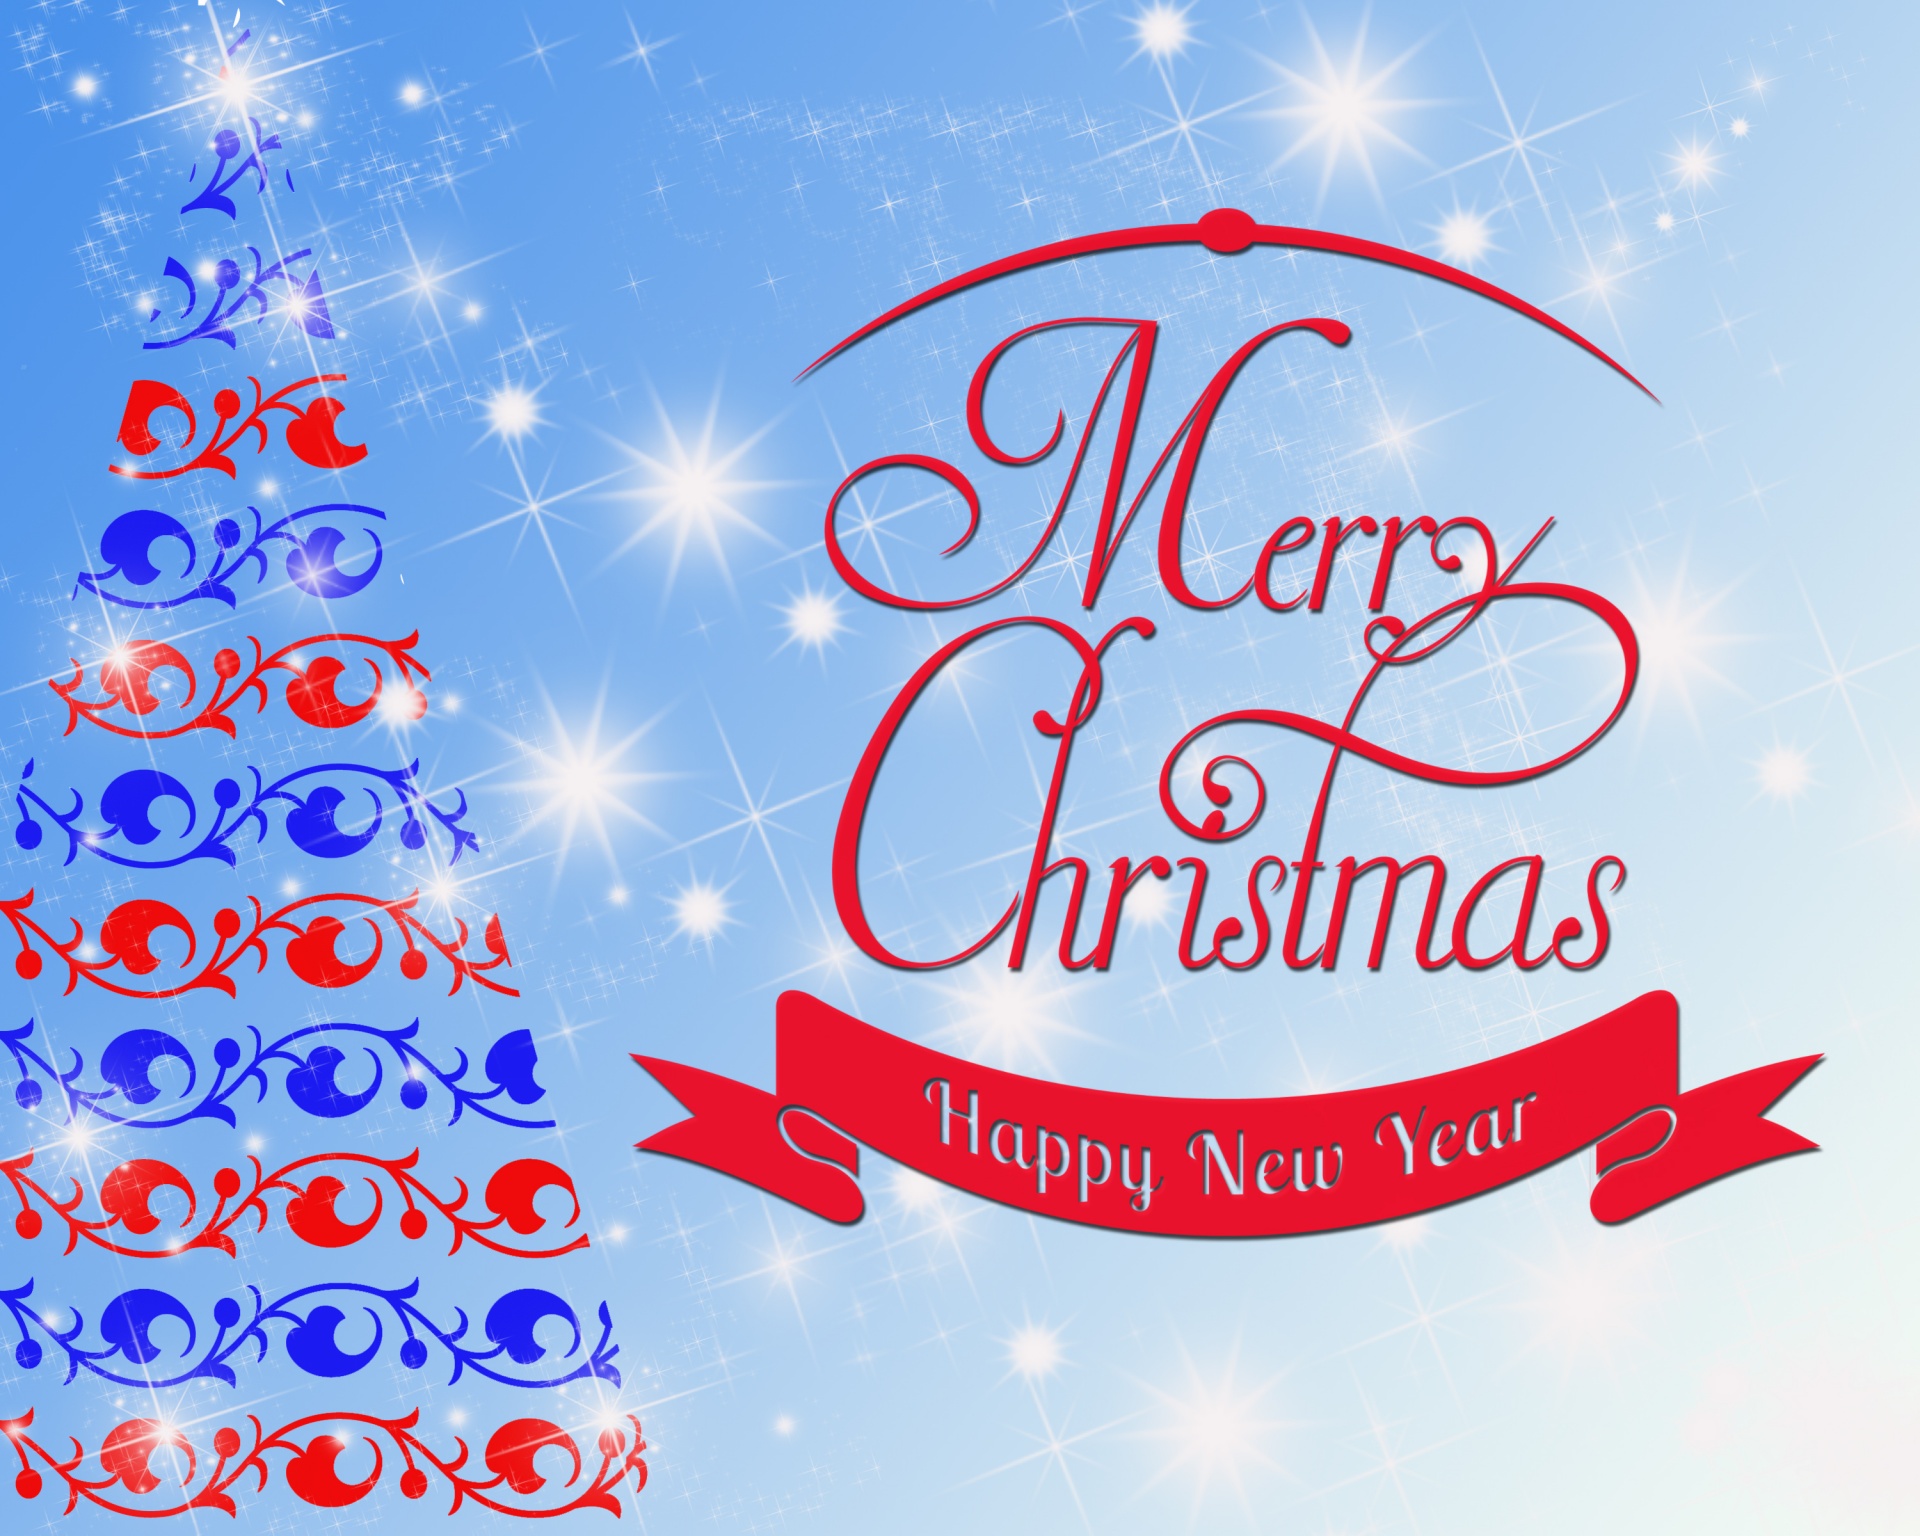 Red and Blue Christmas tree with Merry Christmas and Happy New Year greeting